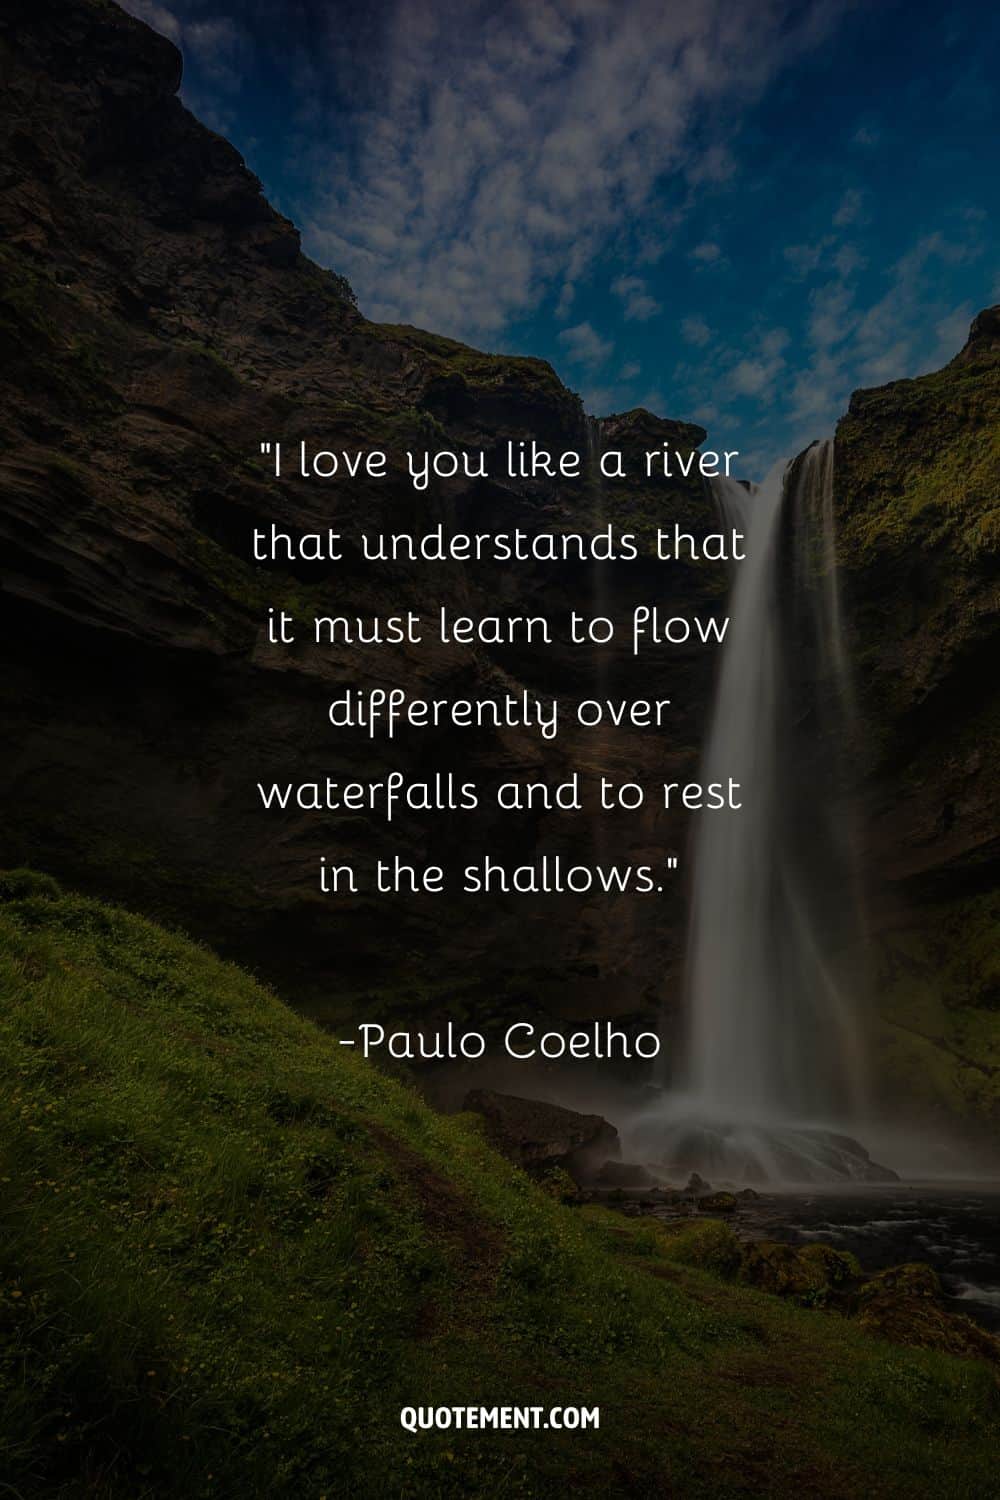 Paulo Coelho comparing his love to a river, and a waterfall in the background, too
